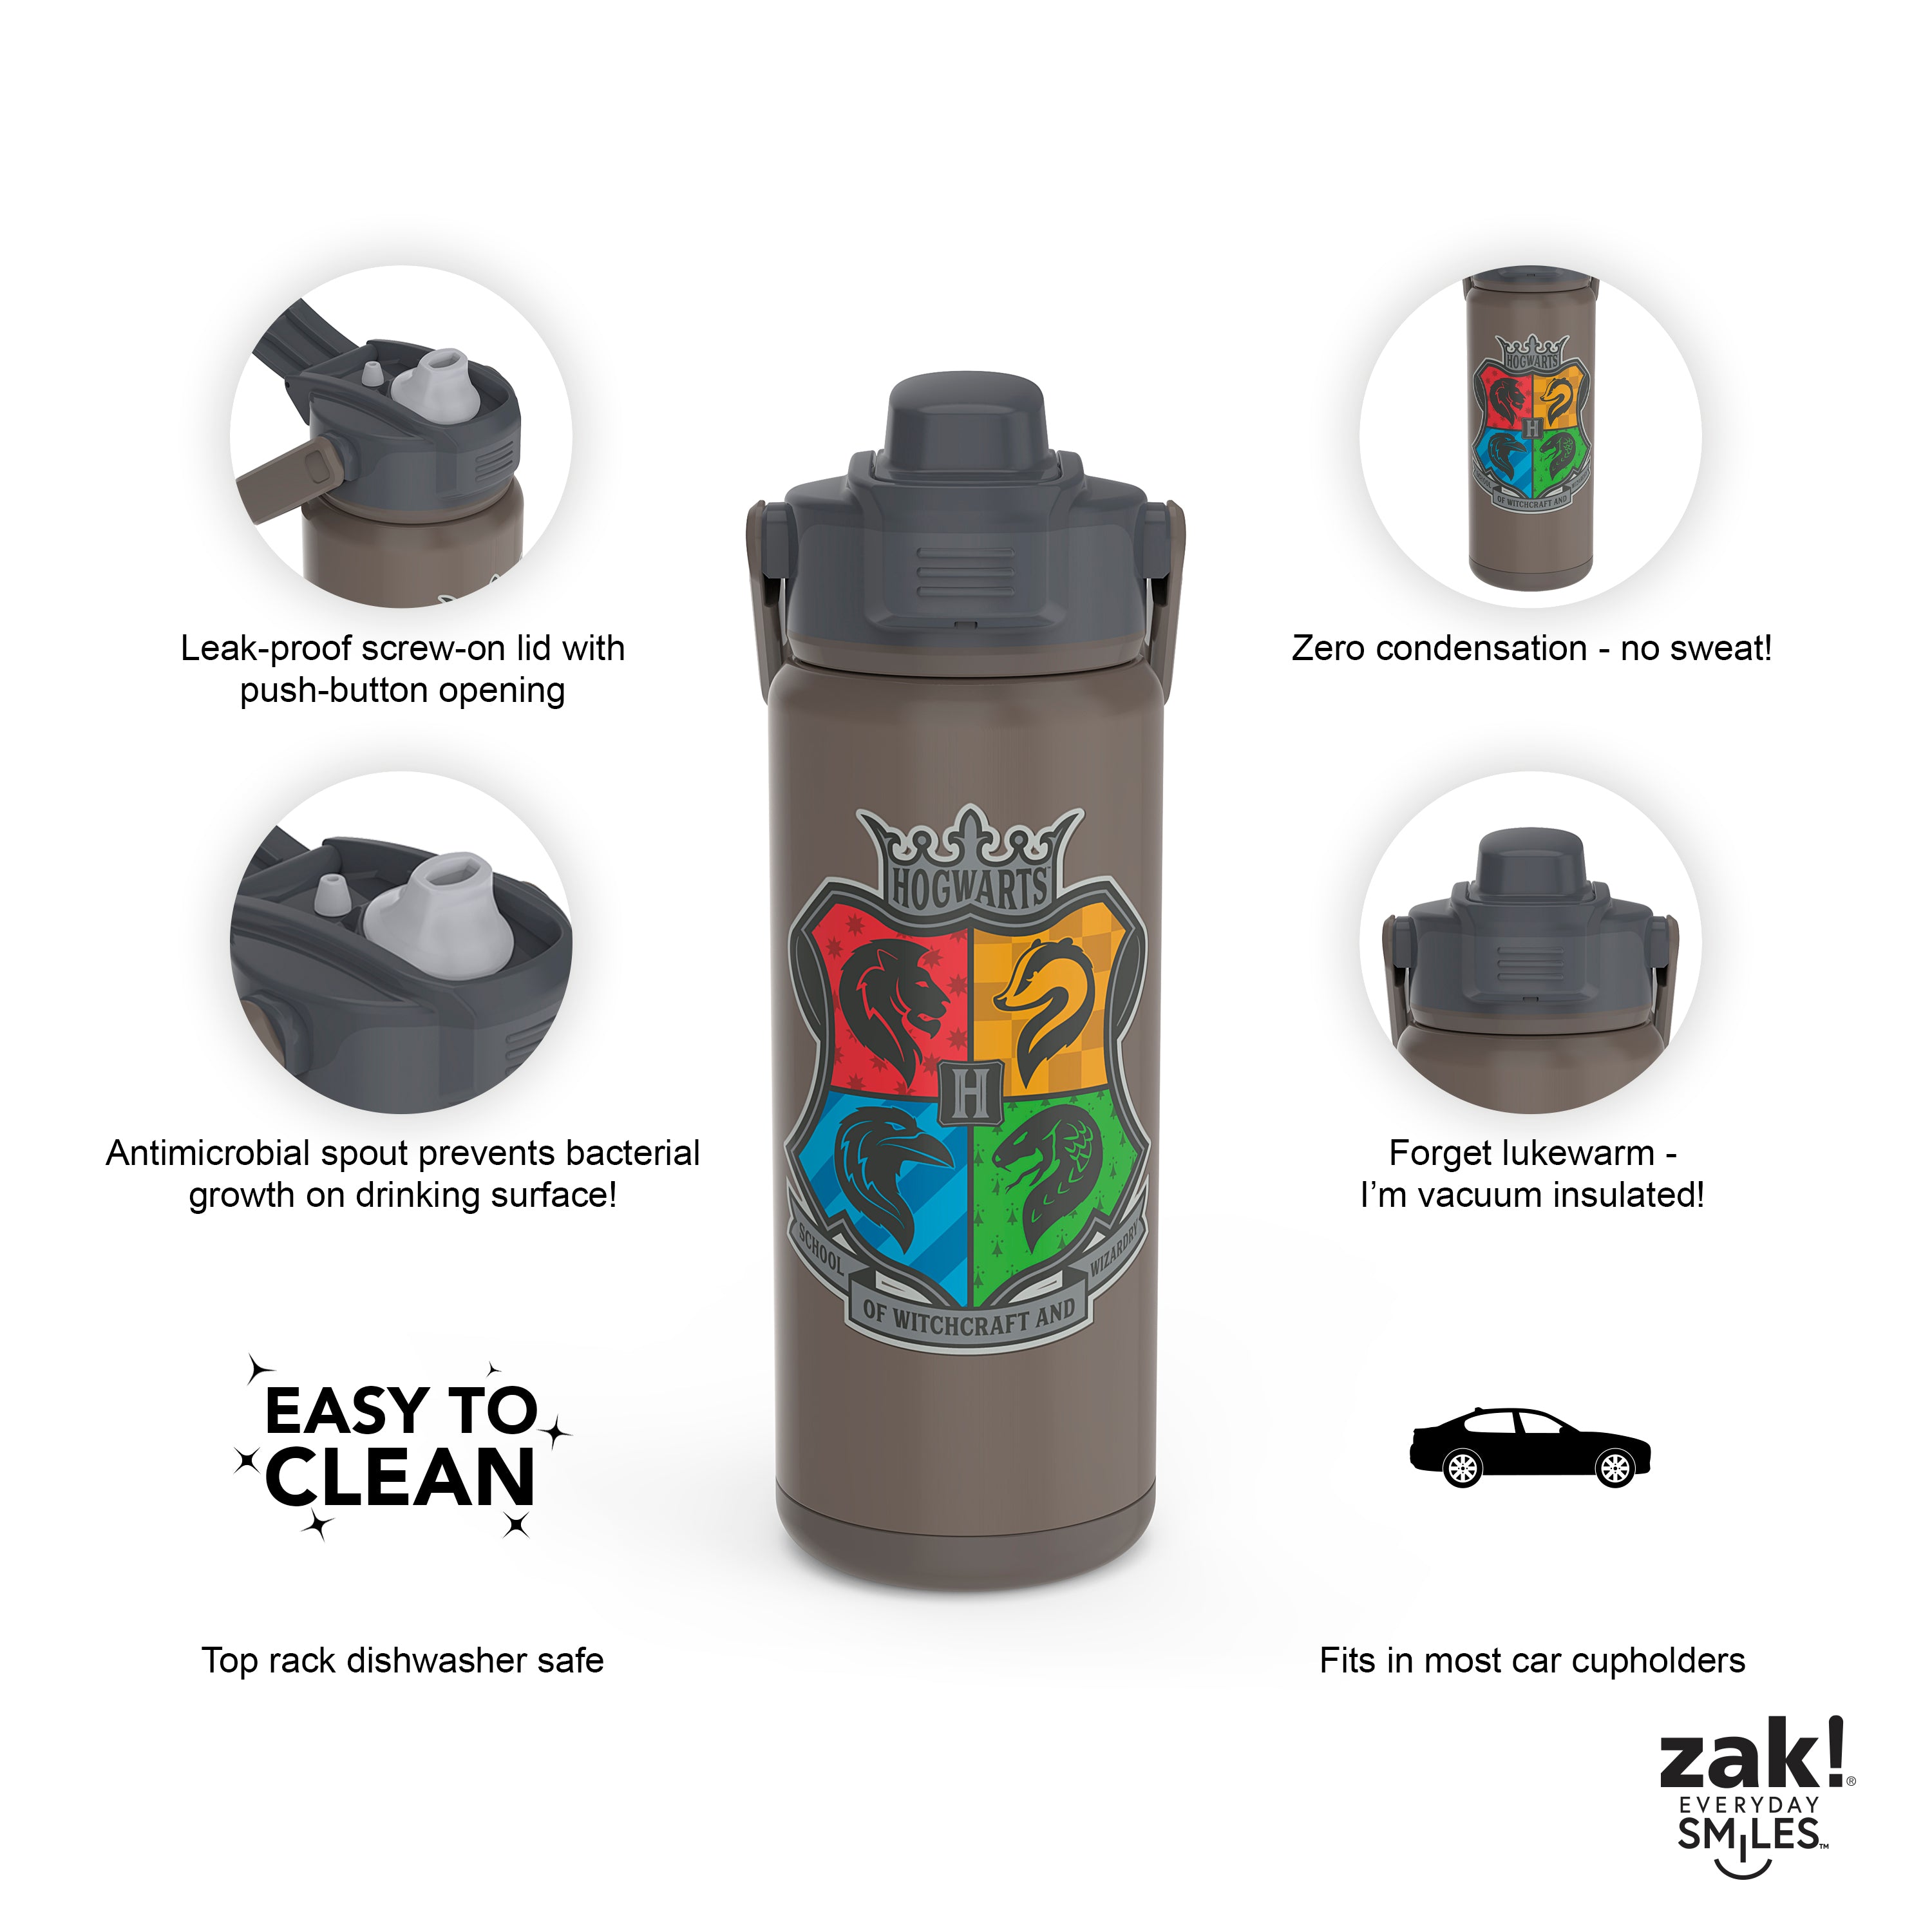 Zak Designs 27 oz. Harry Potter Stainless Steel Water Bottle with